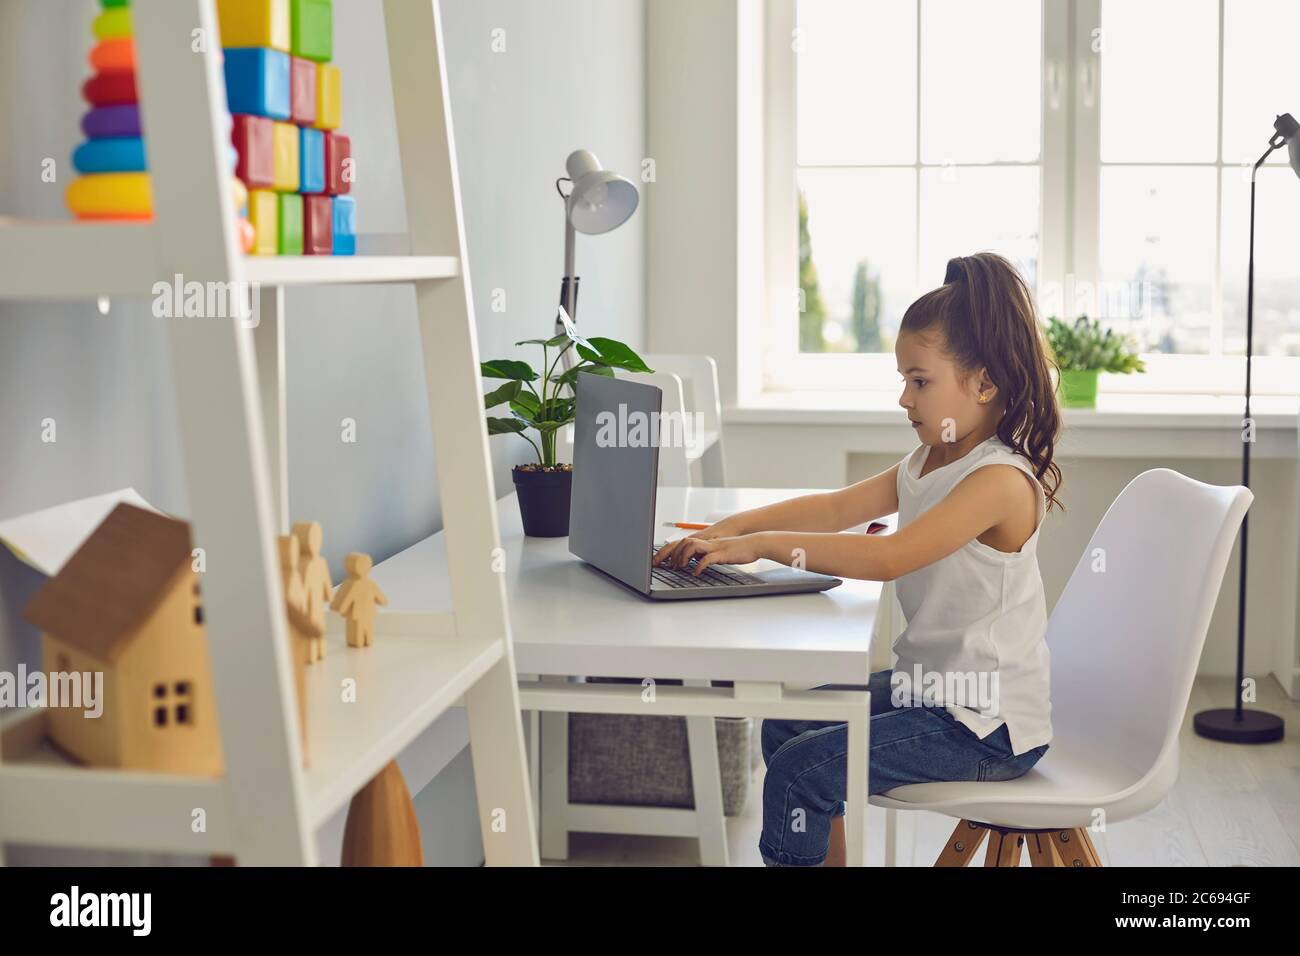 Online education of children. Serious little girl is typing laptop text while sitting at a table at home. Stock Photo